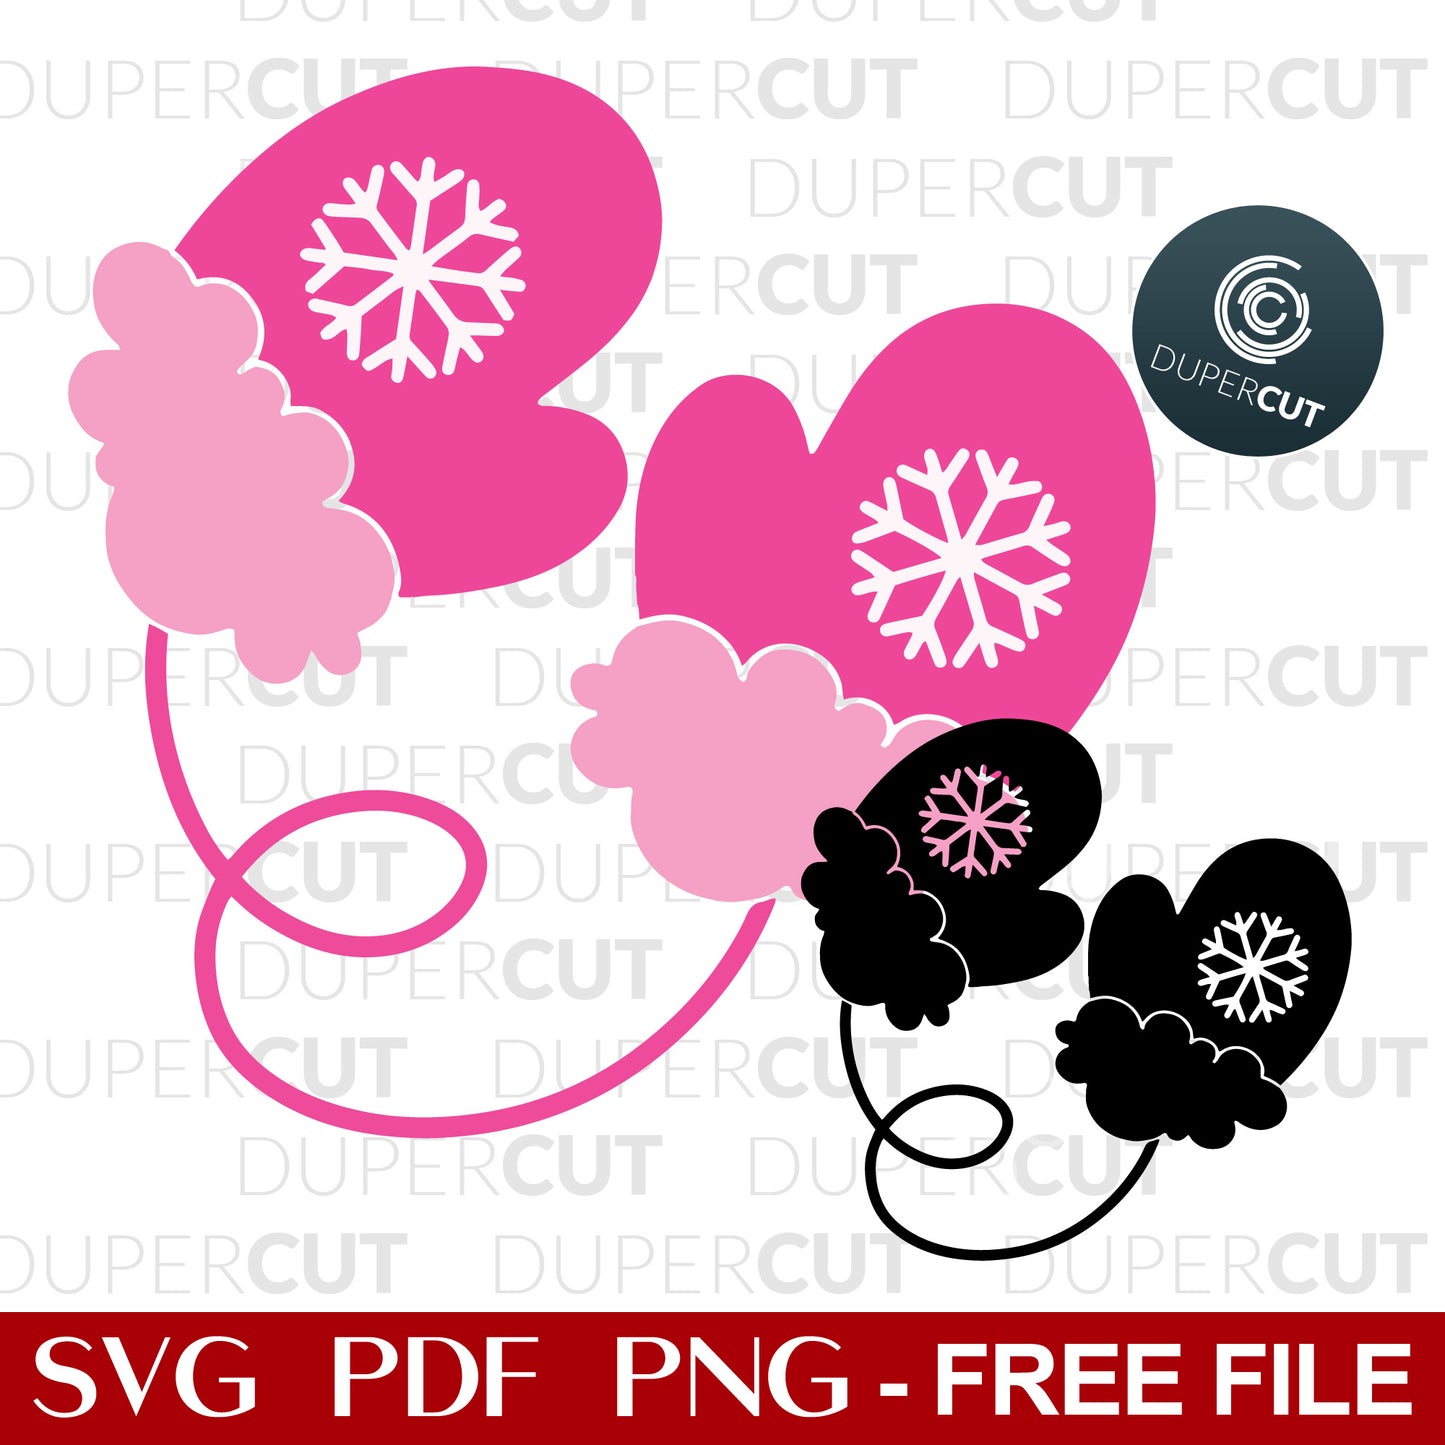 Mittens - FREE cutting file for commercial use. SVG PDF DXF vector template for vinyl, tumblers, t-shirts, laser cutting with Glowforge, Cricut, Silhouette cameo